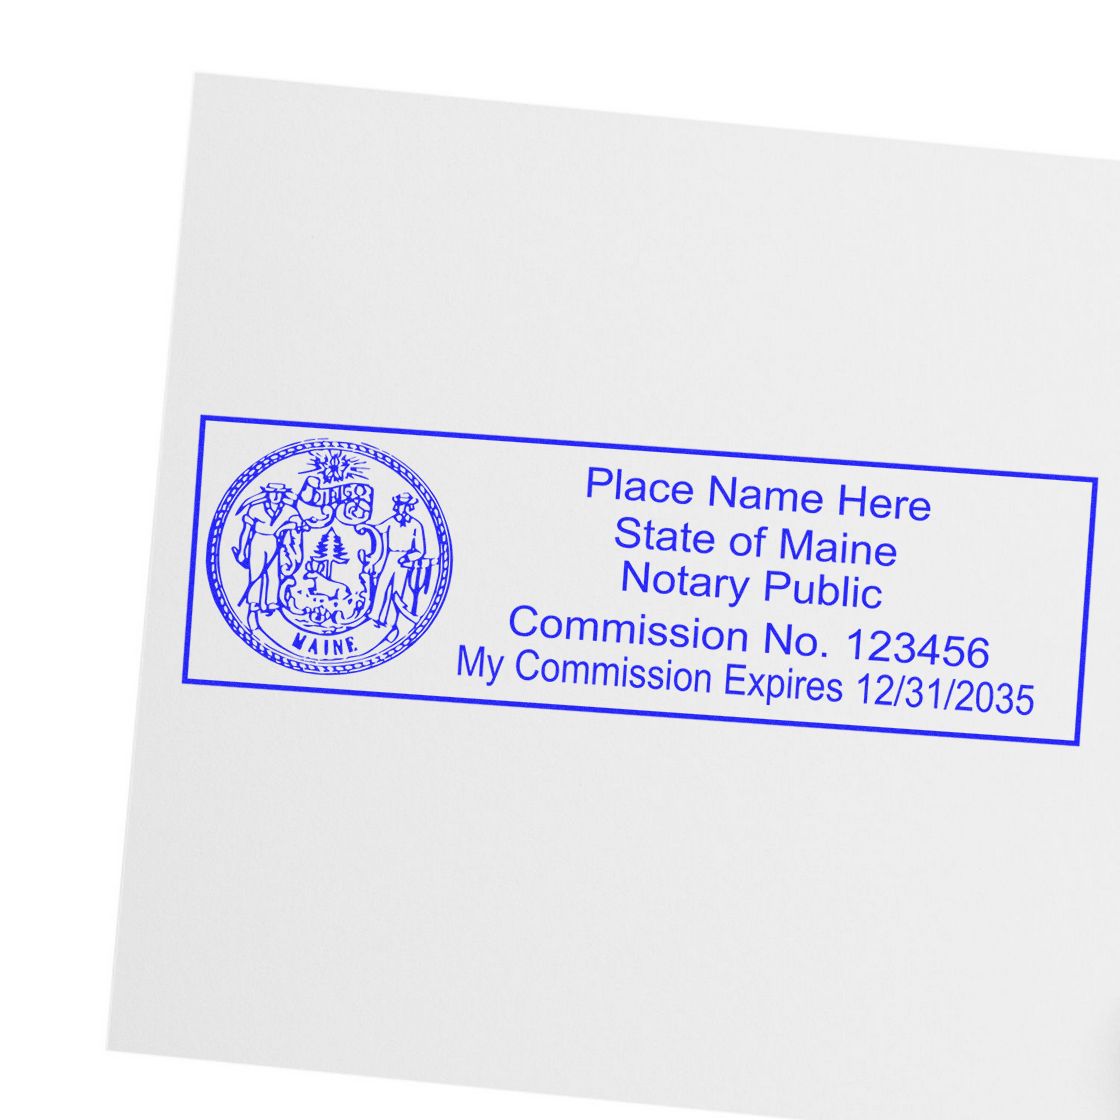 The MaxLight Premium Pre-Inked Maine State Seal Notarial Stamp stamp impression comes to life with a crisp, detailed photo on paper - showcasing true professional quality.